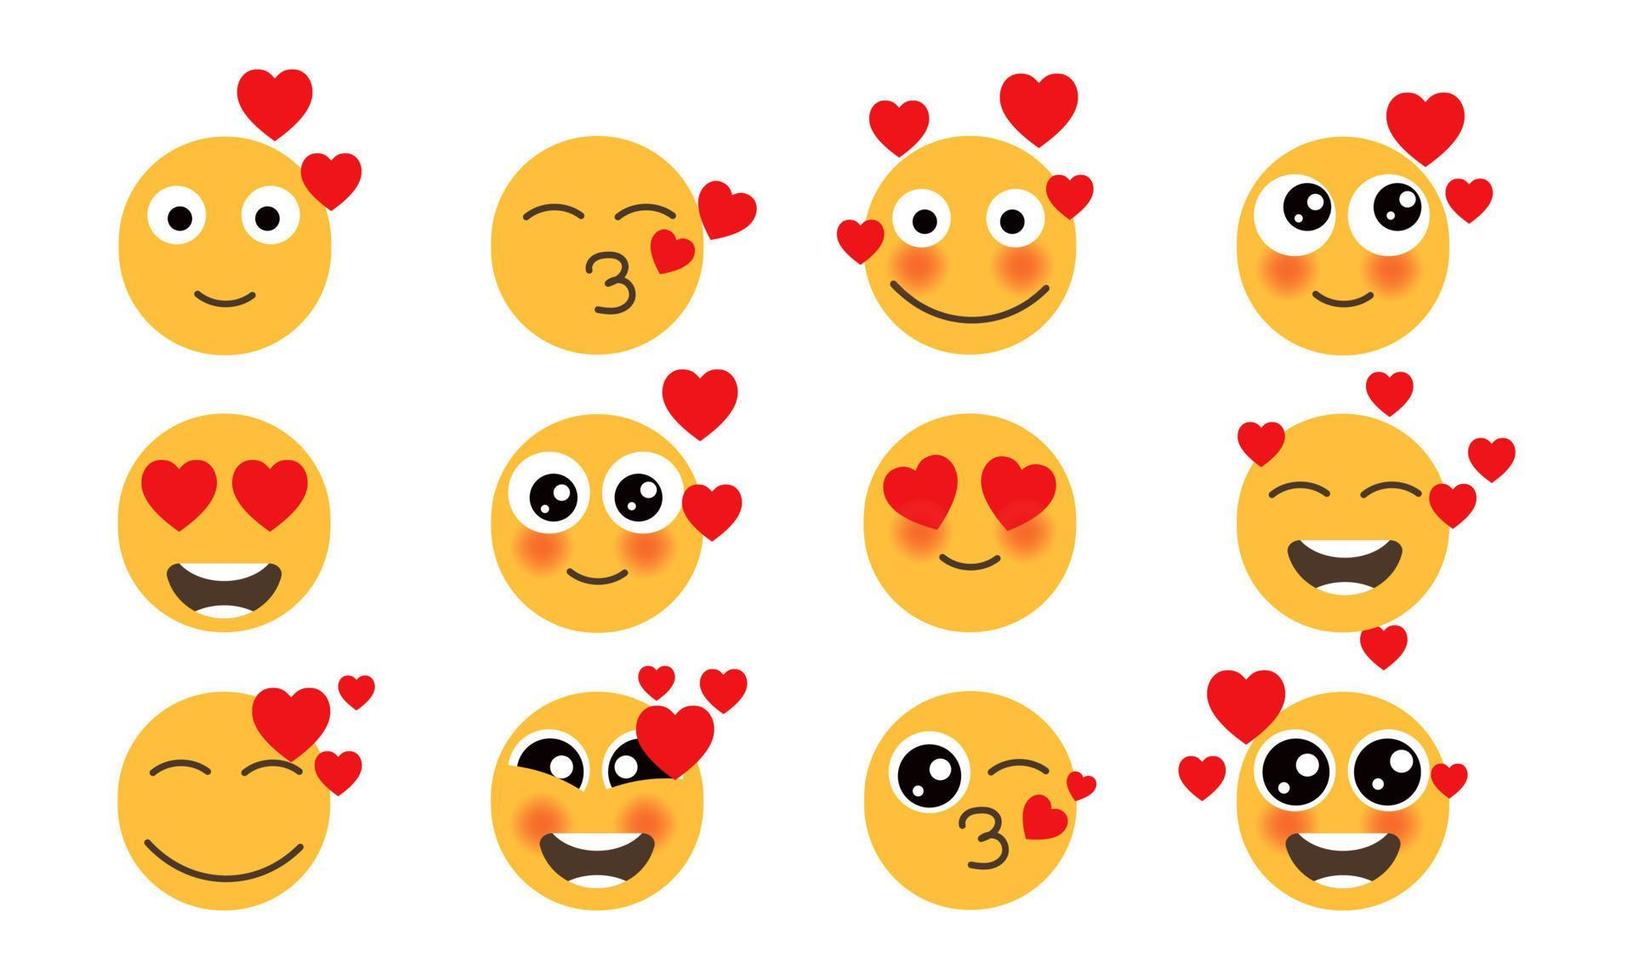 Eyes love set emoticons yellow face. vector